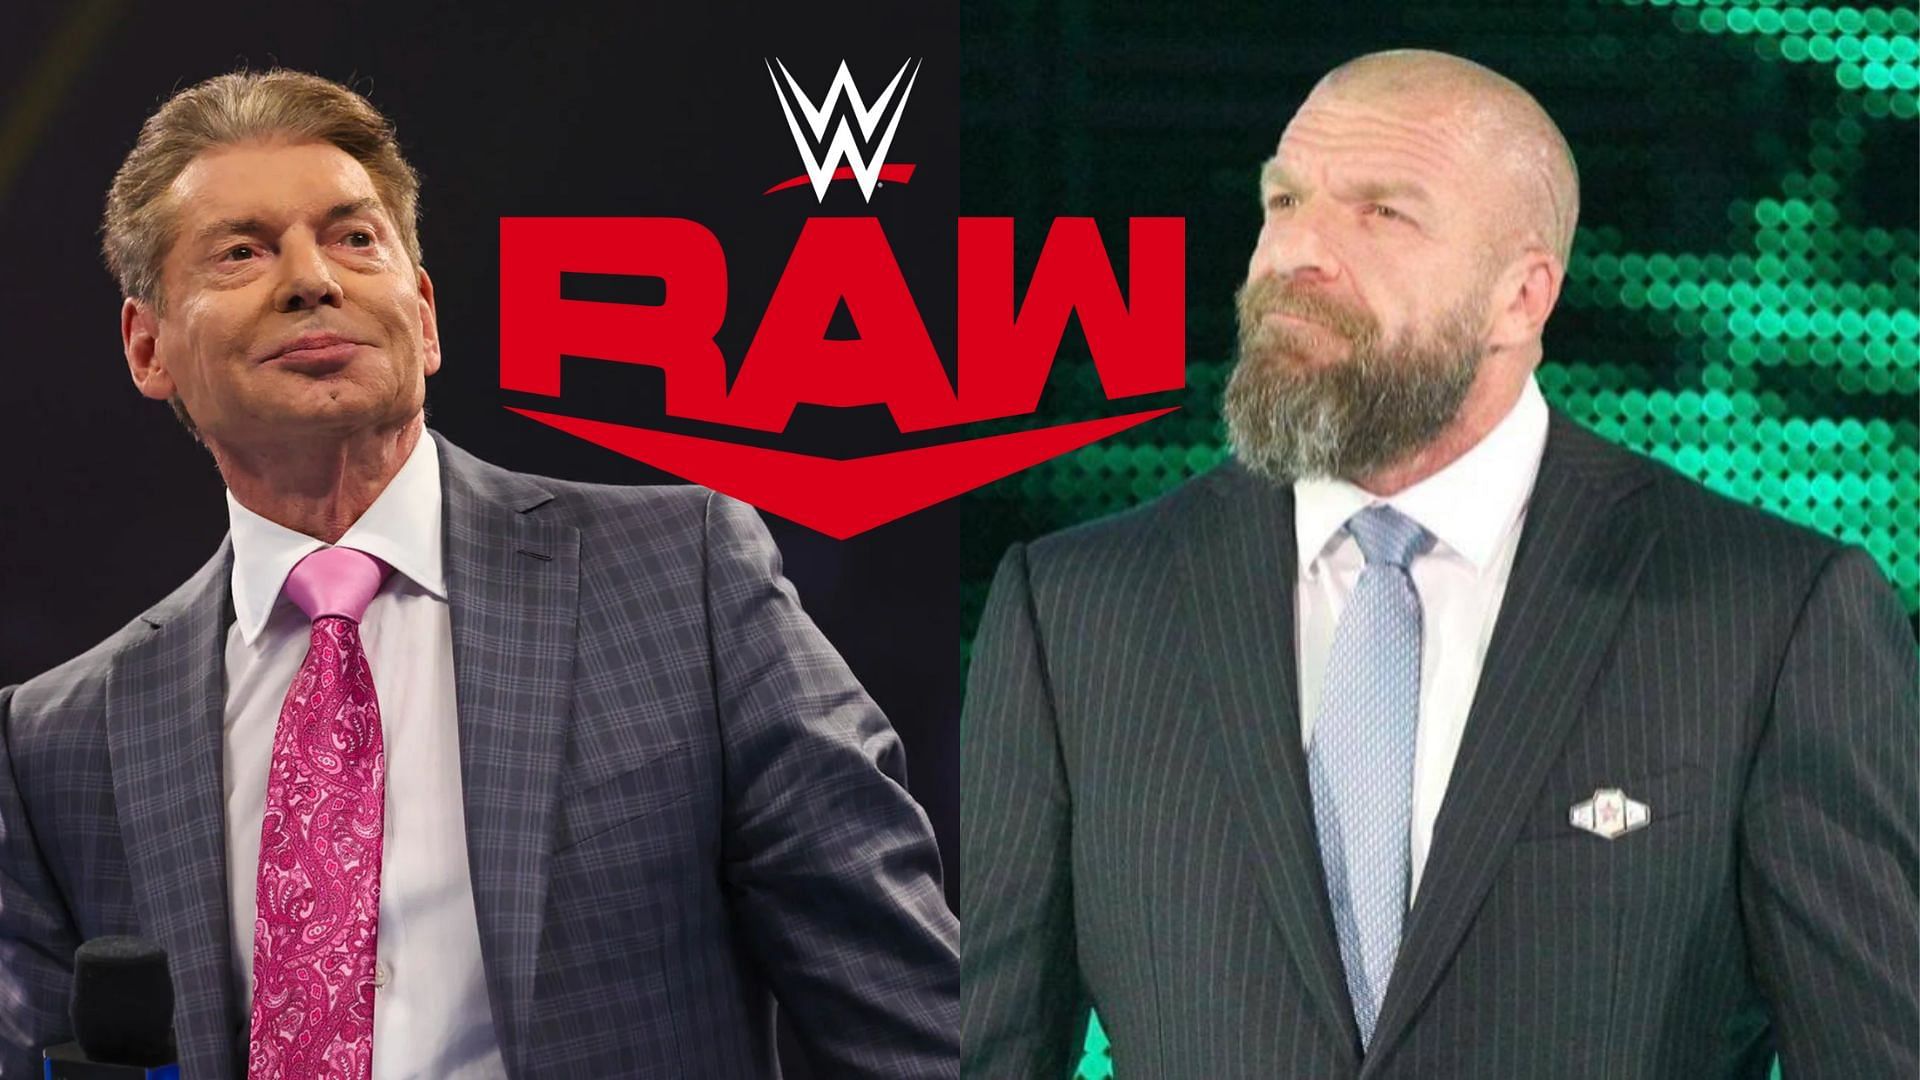 2-time WWE Champion seemingly plans to pitch outlandish storyline to Triple H after Vince McMahon had rejected it